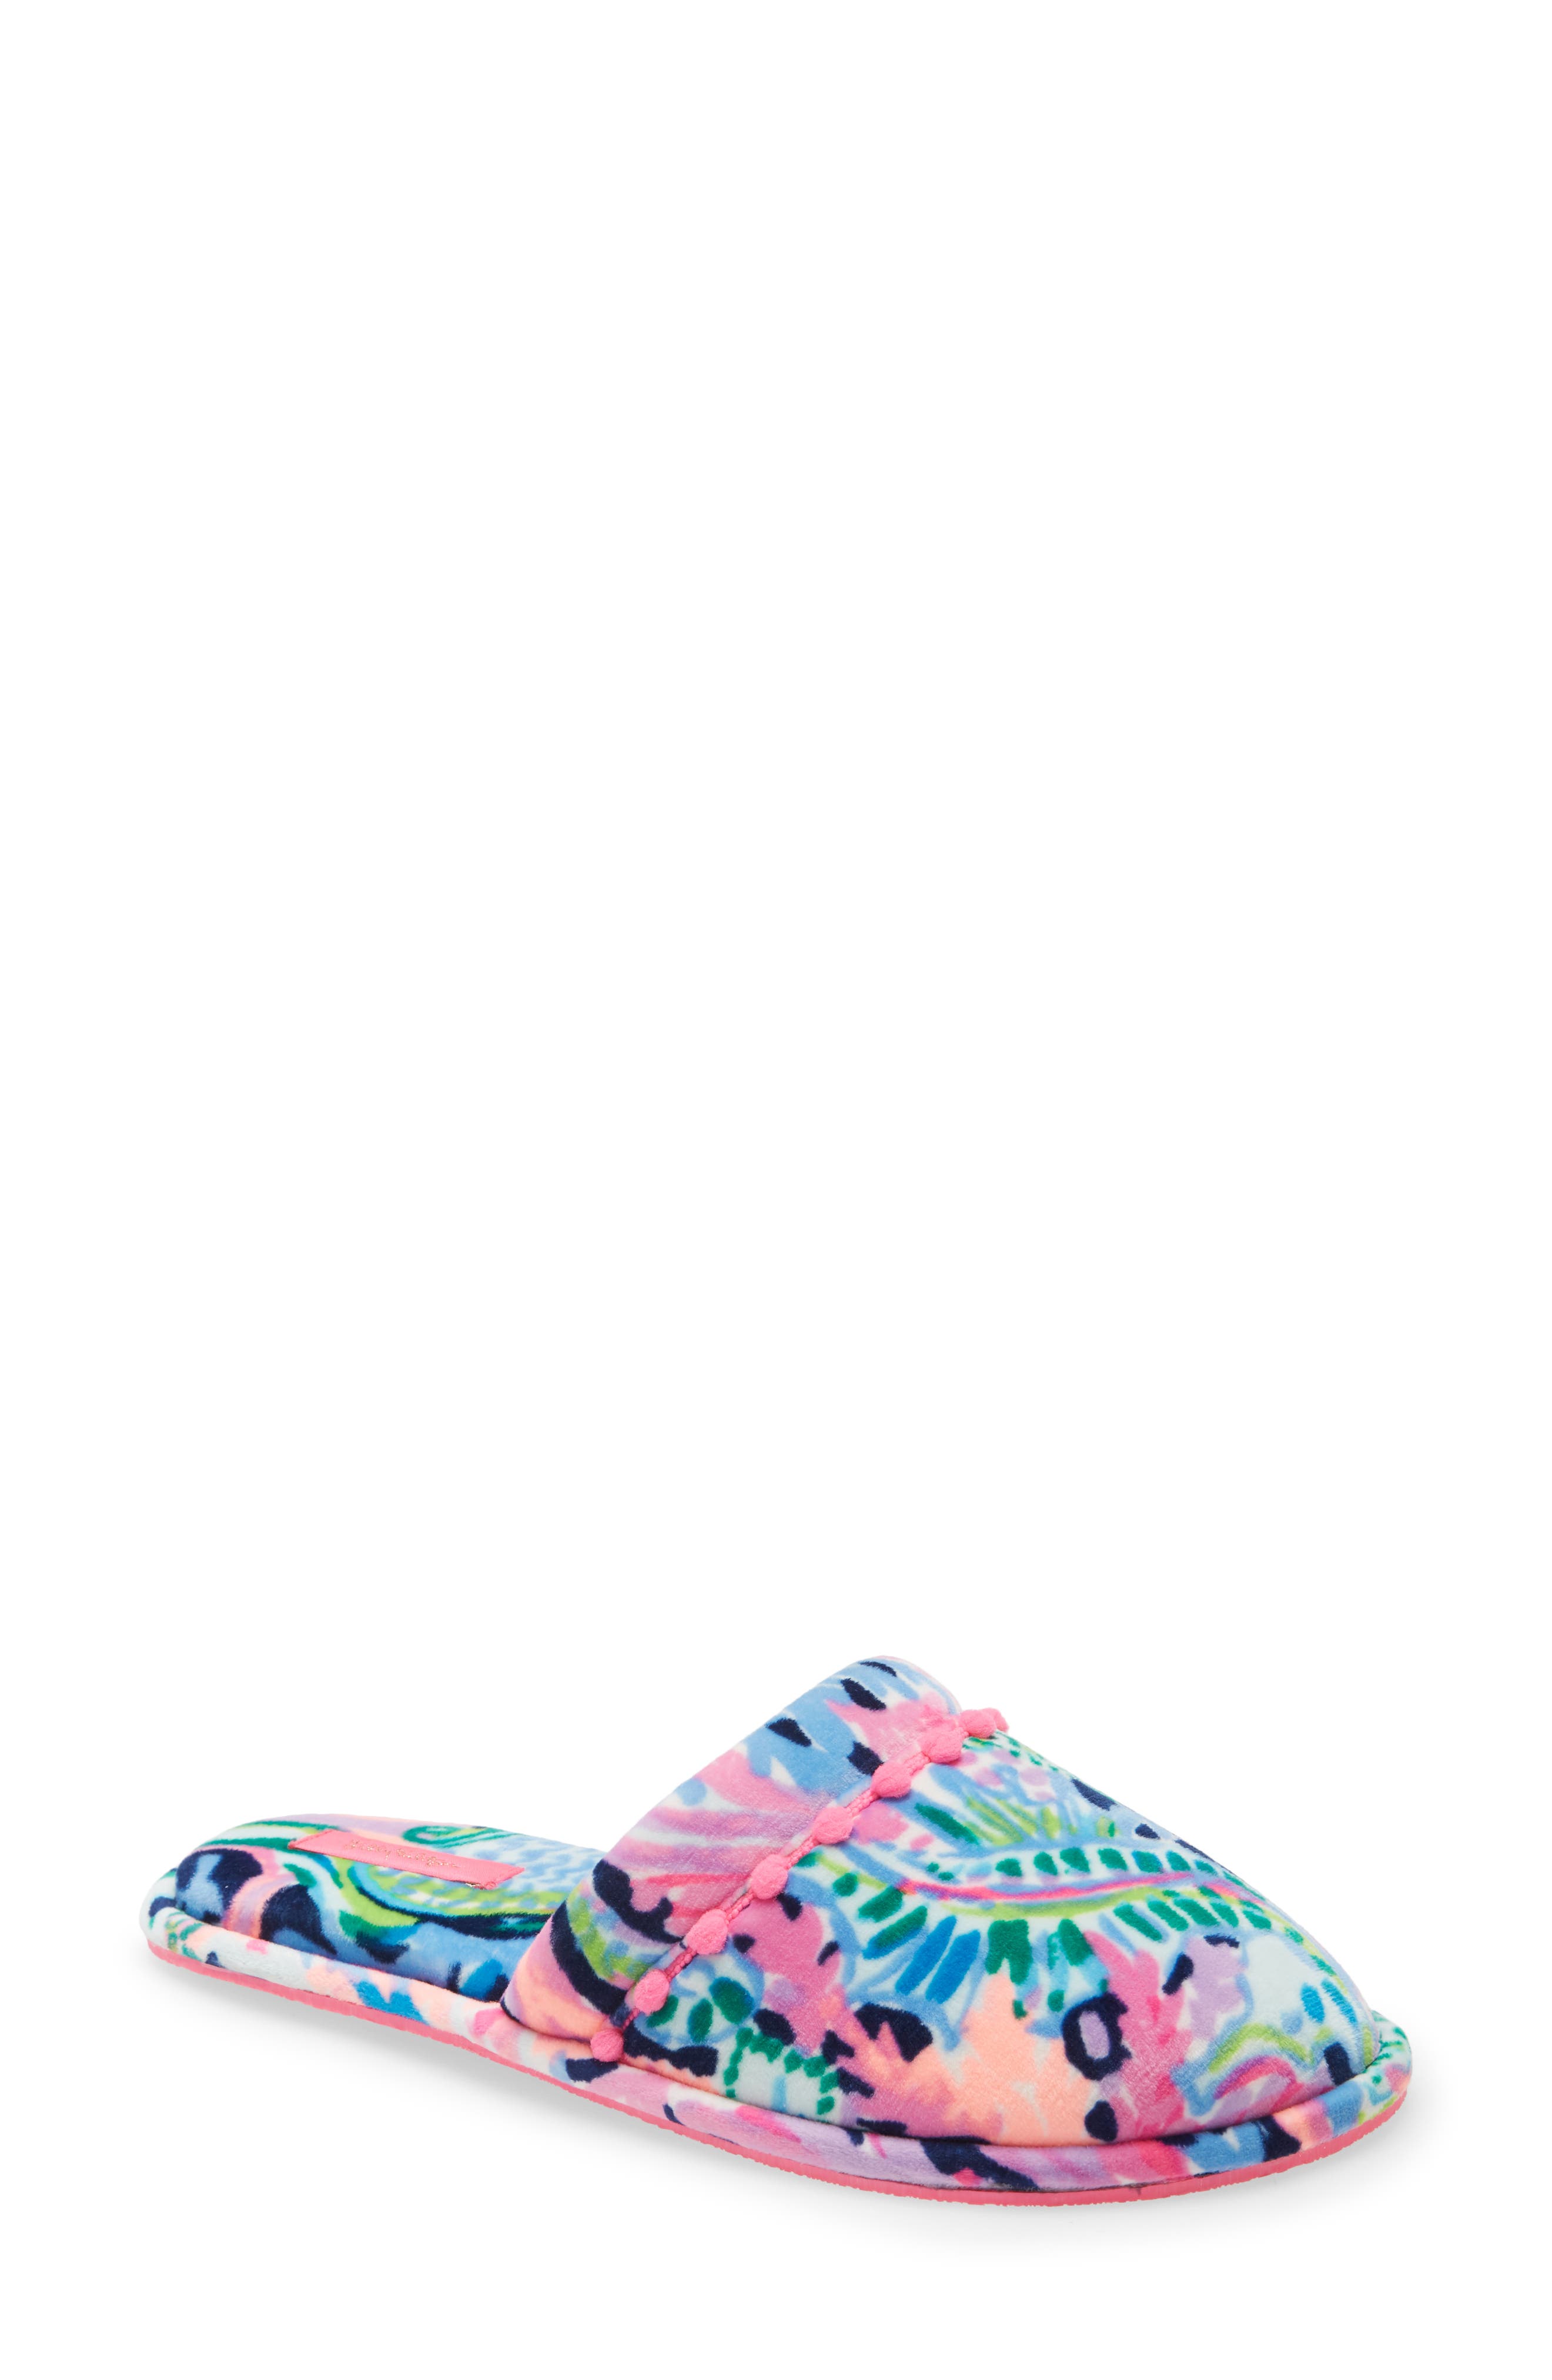 lilly pulitzer slippers